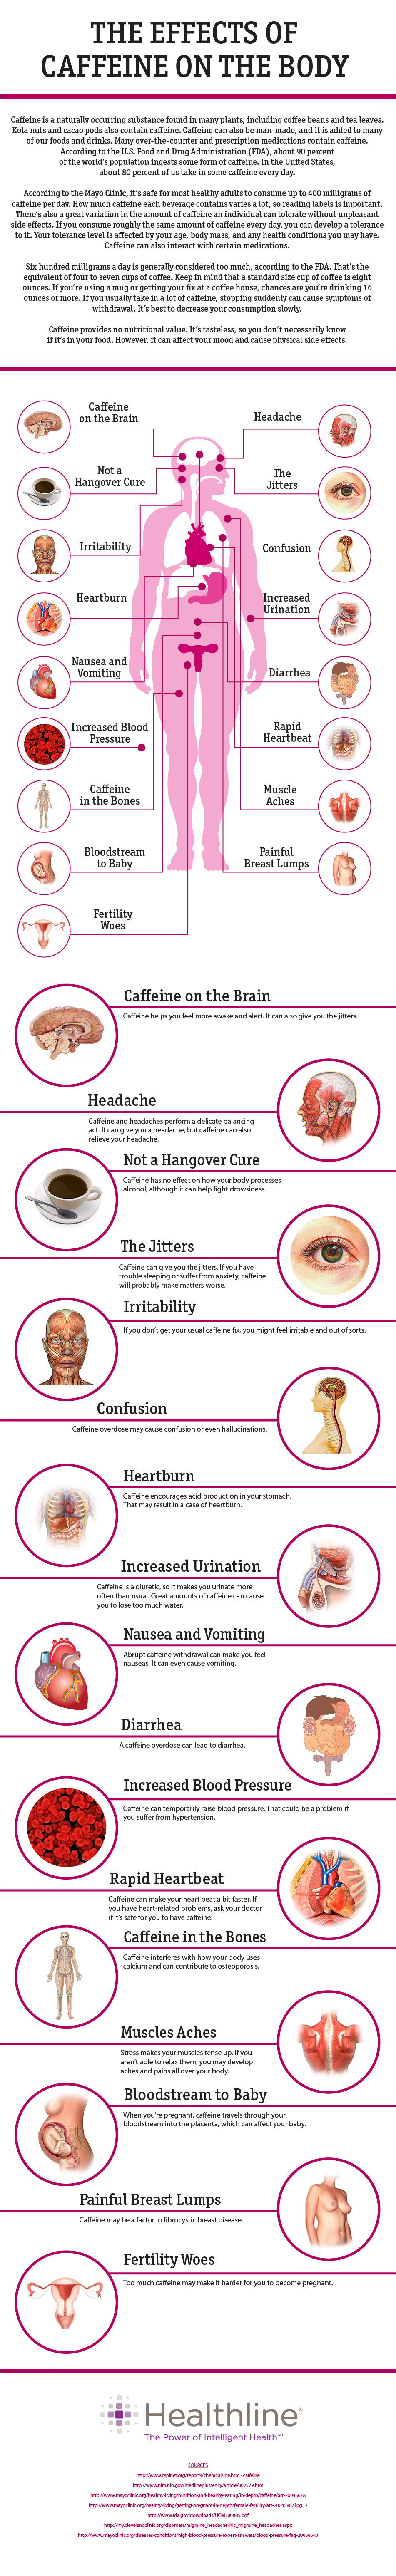 Effects of caffeine on the Body